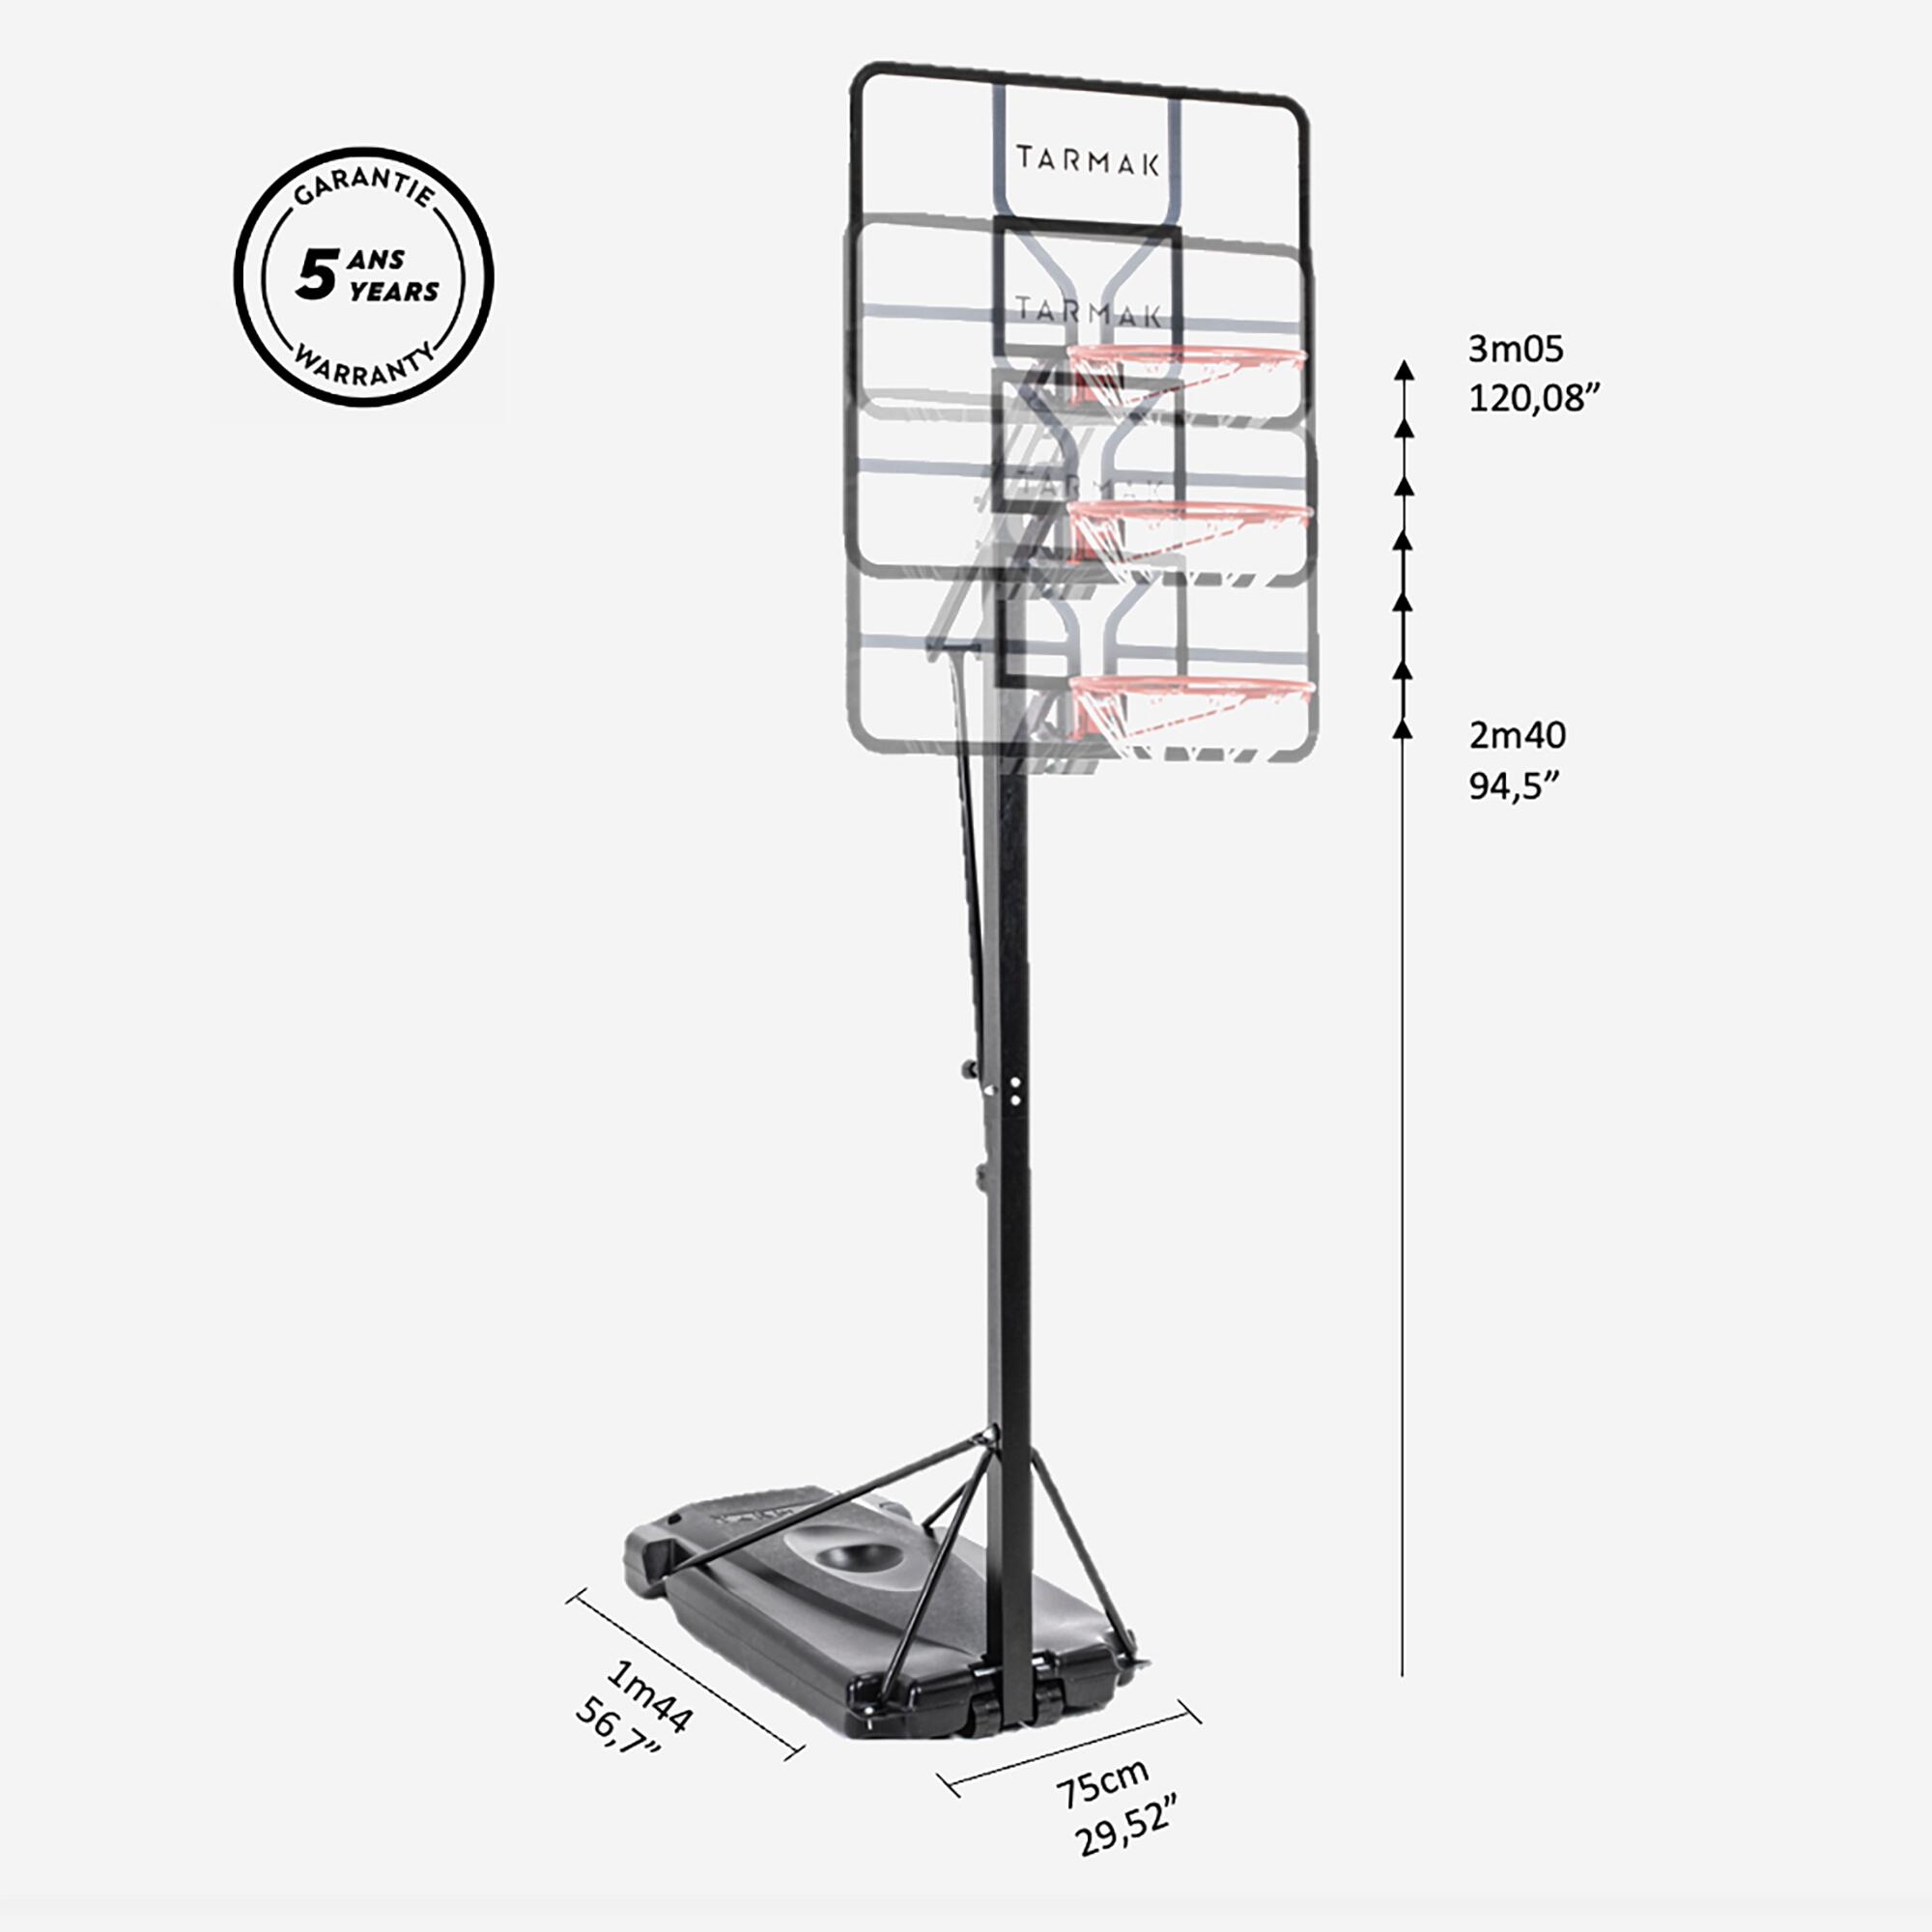 Basketball Hoop with Easy-Adjustment Stand (2.40m to 3.05m) B700 Pro 6/10